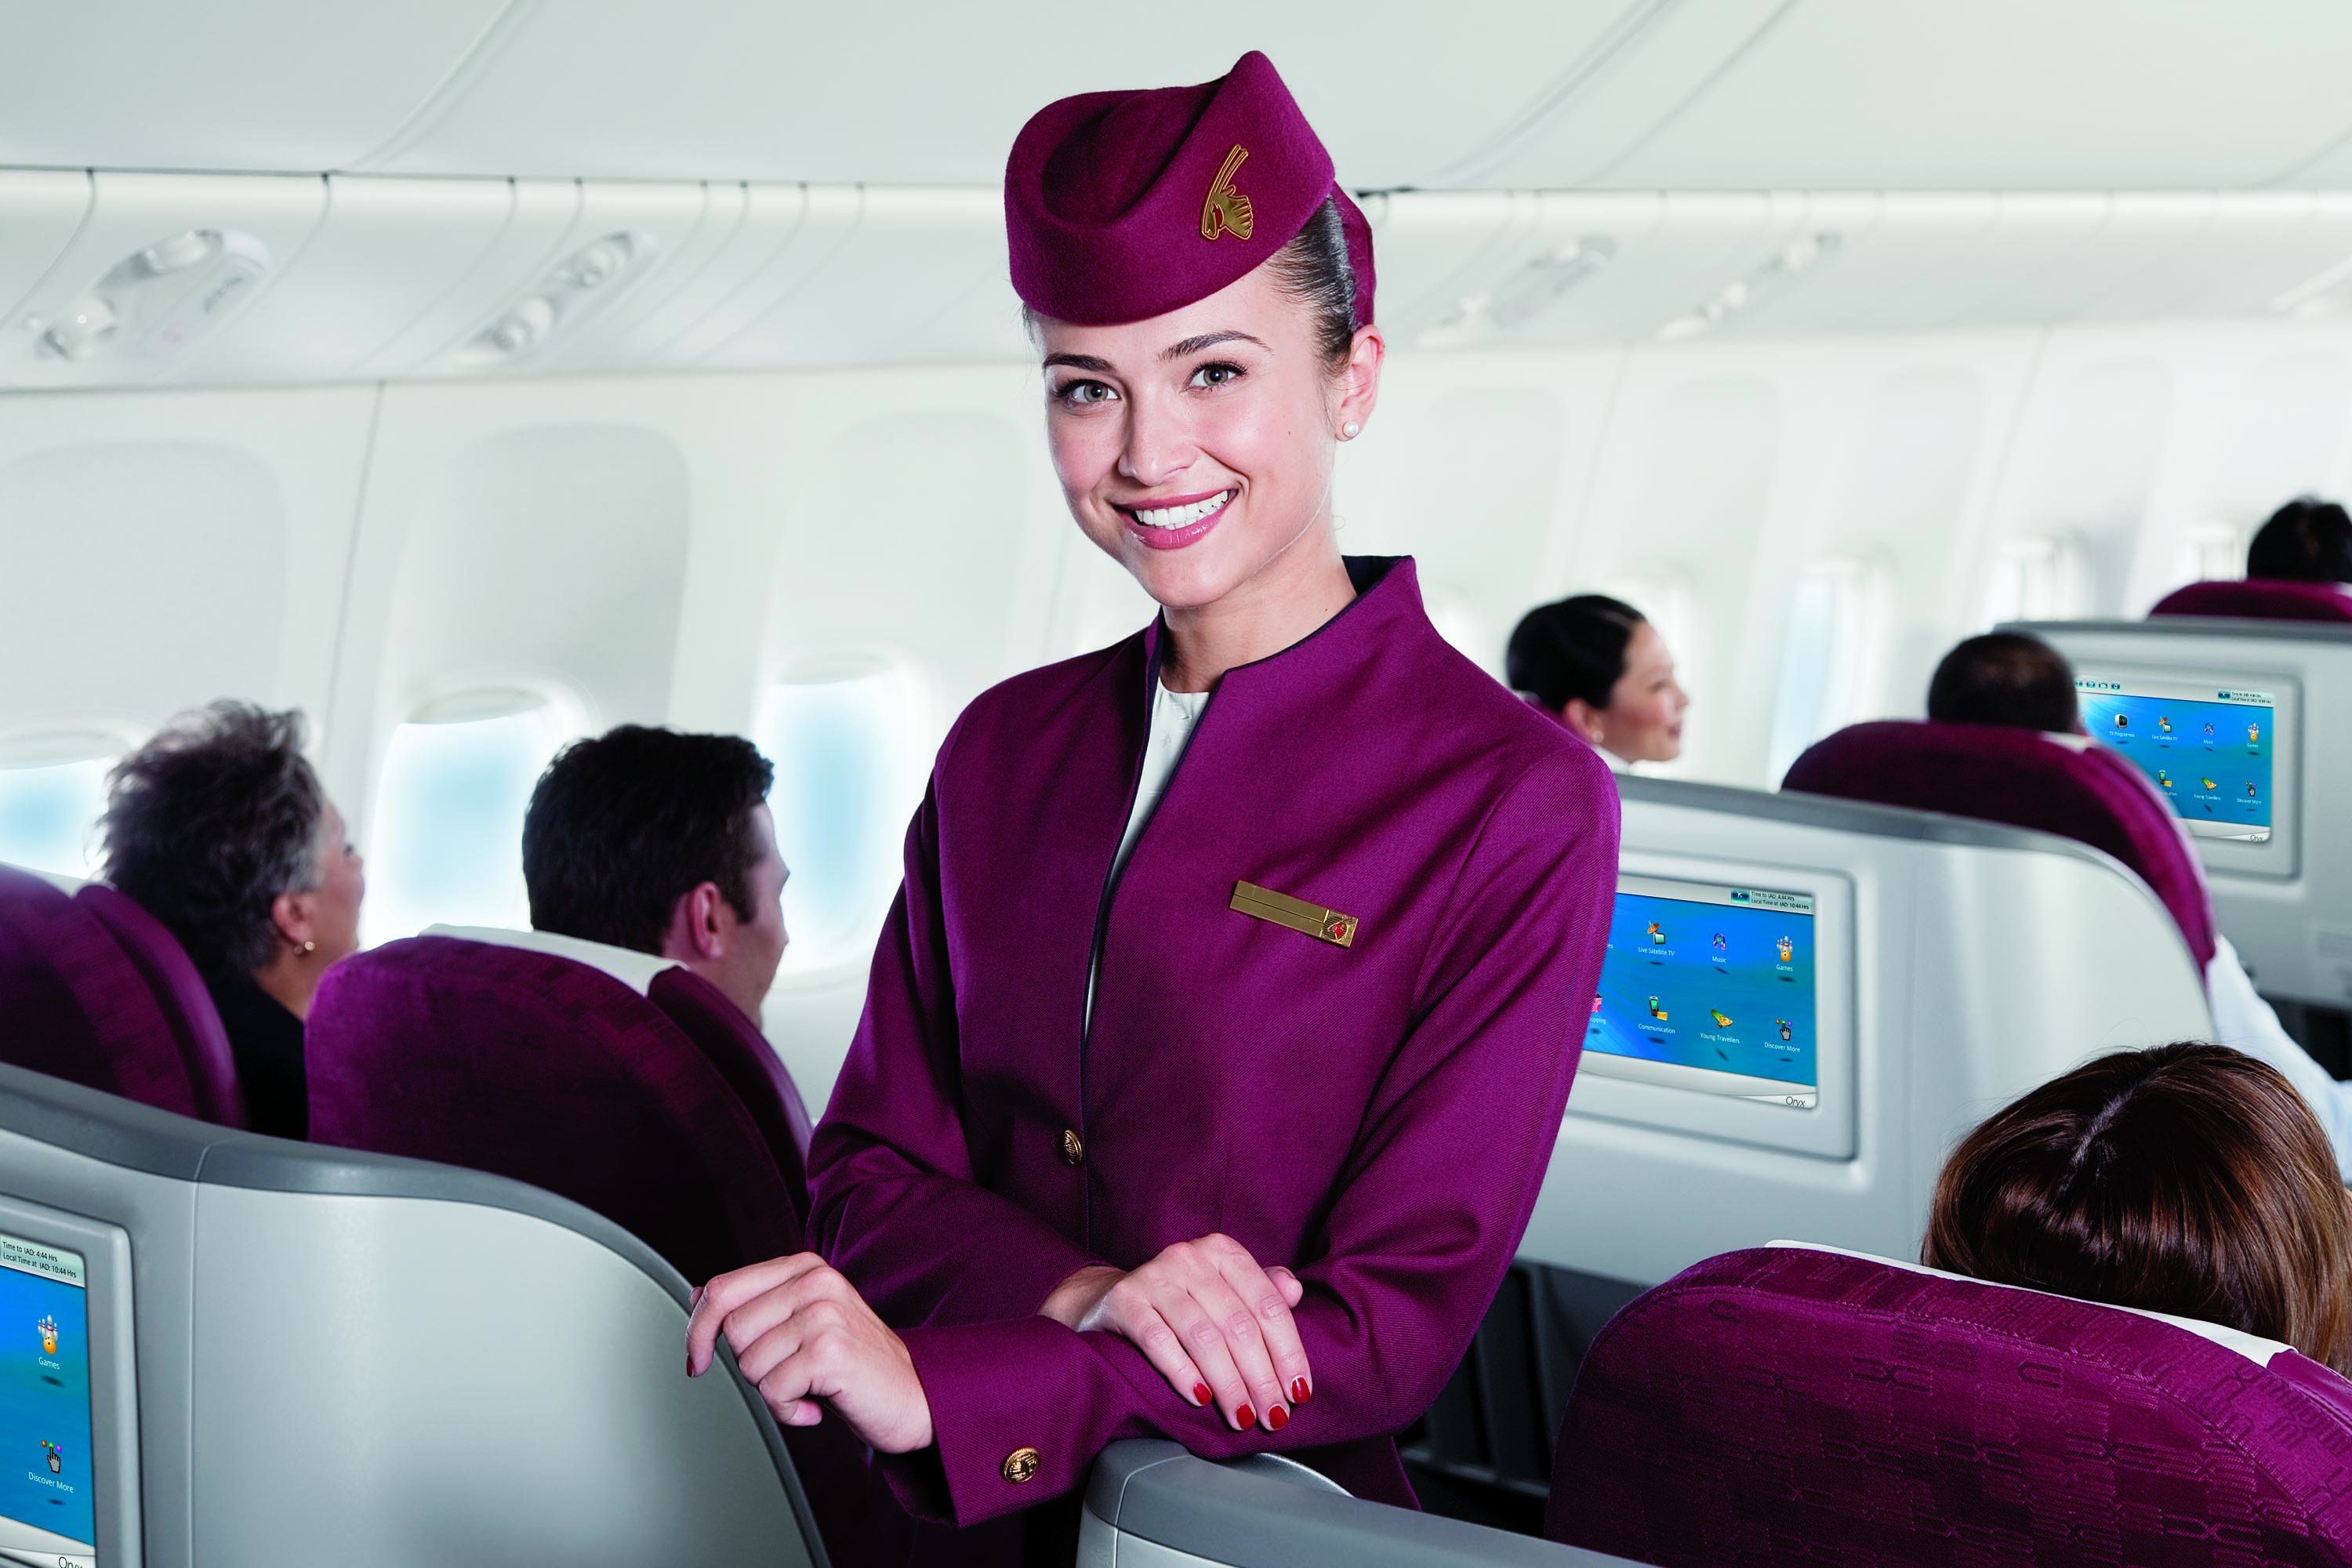 A Qatar Airways cabin crew working in the business class cabin.